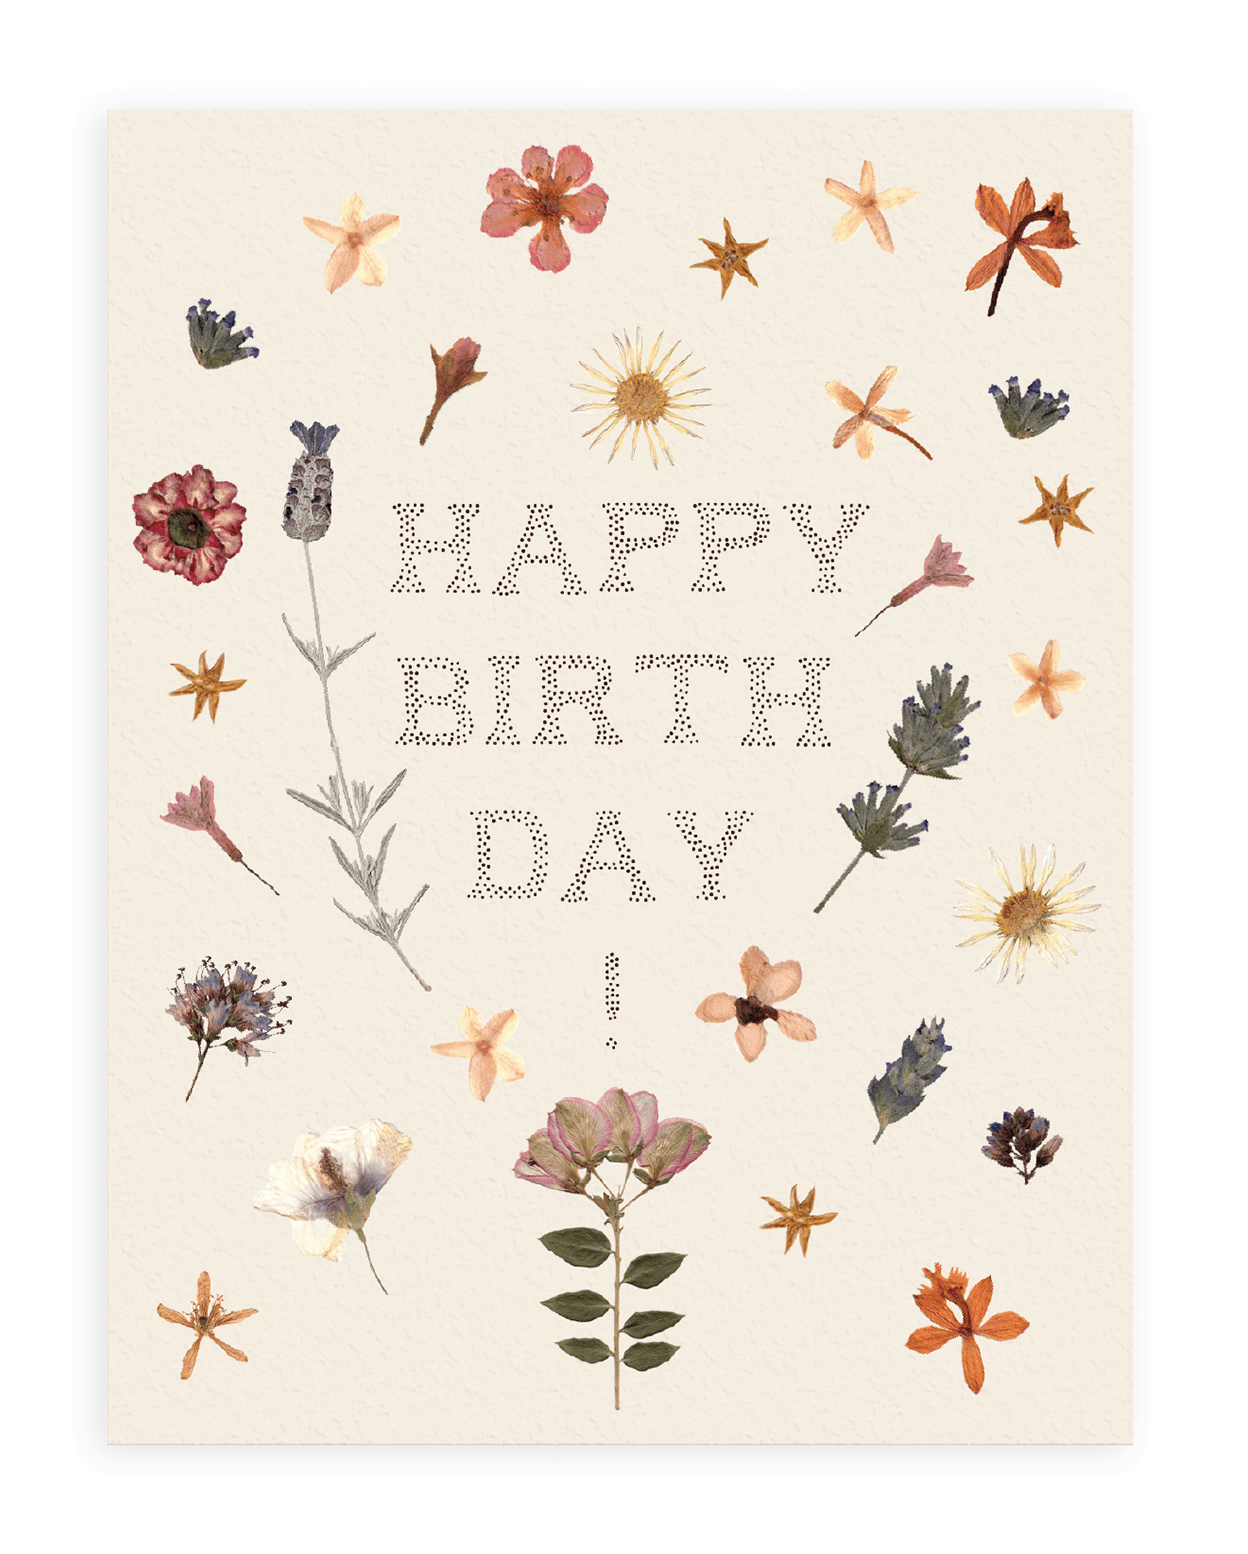 A cream colored card with dried flowers scattered and the words &quot;Happy Birthday!&quot; printed on the cardstock. Shown on white background.